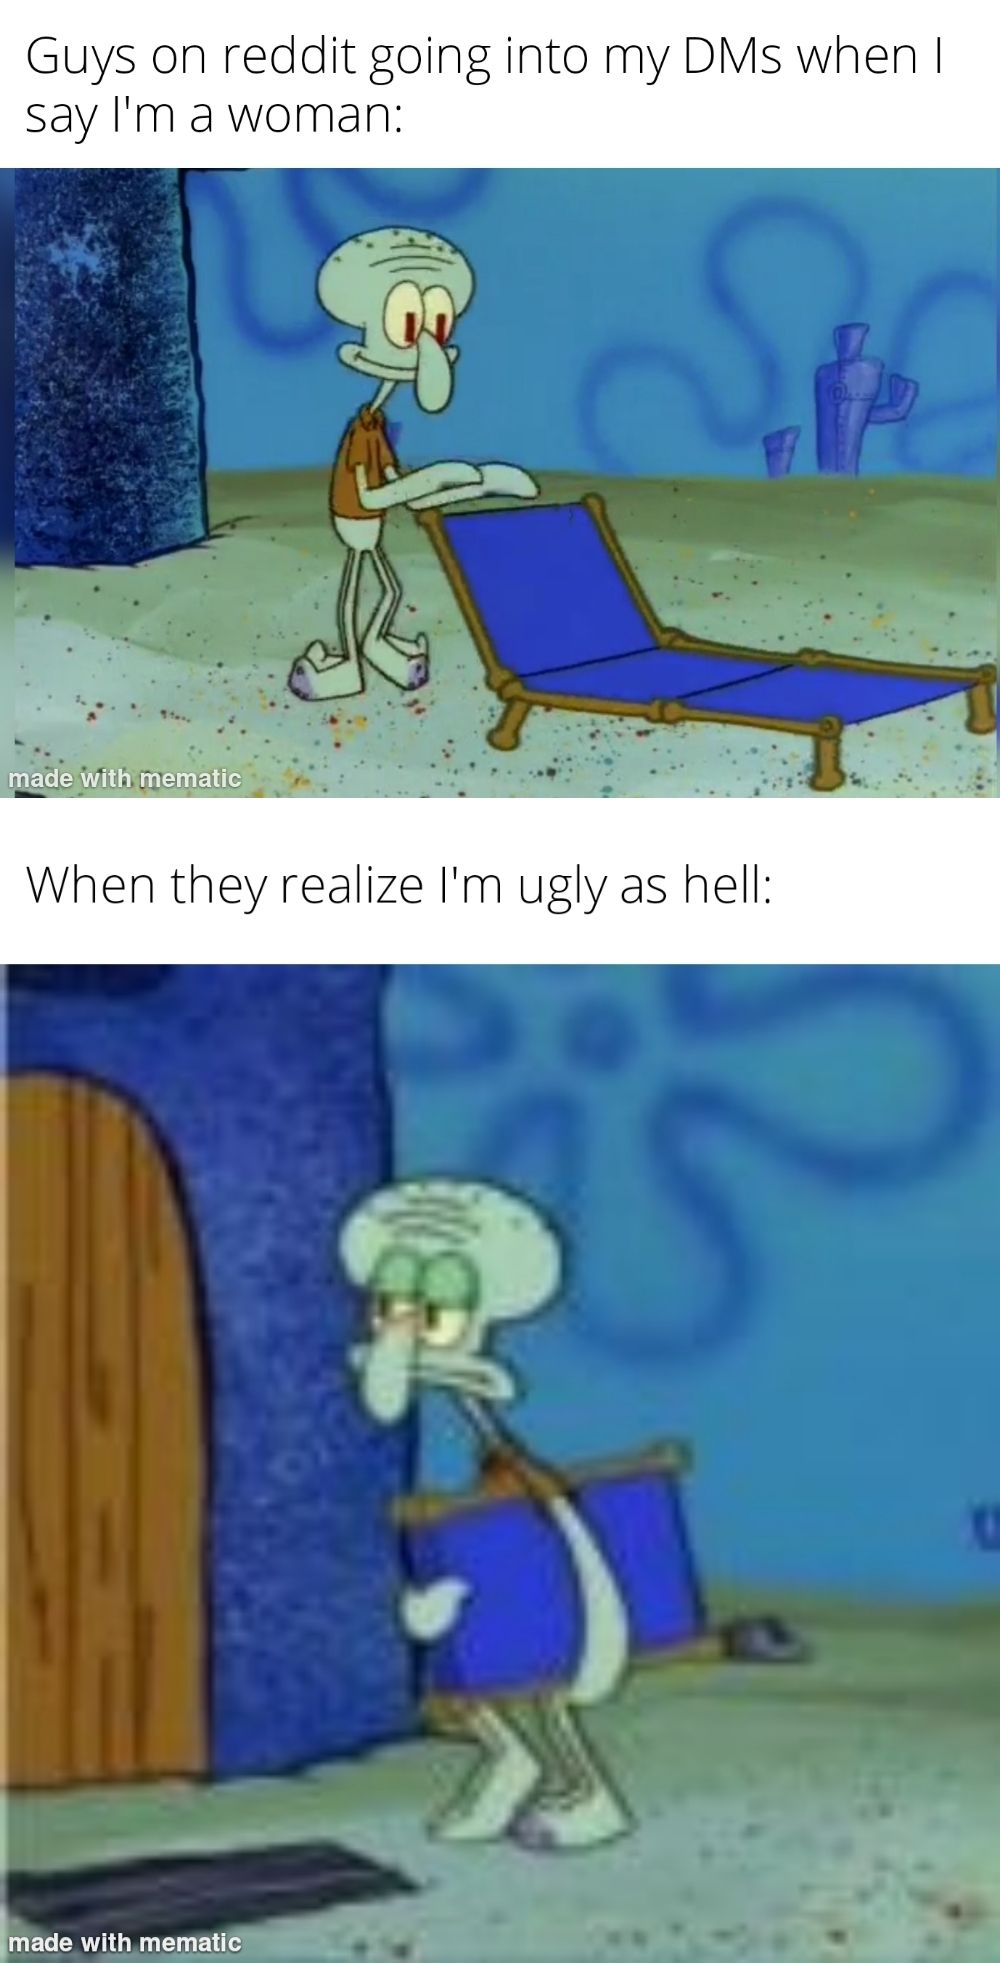 Being ugly has some advantages